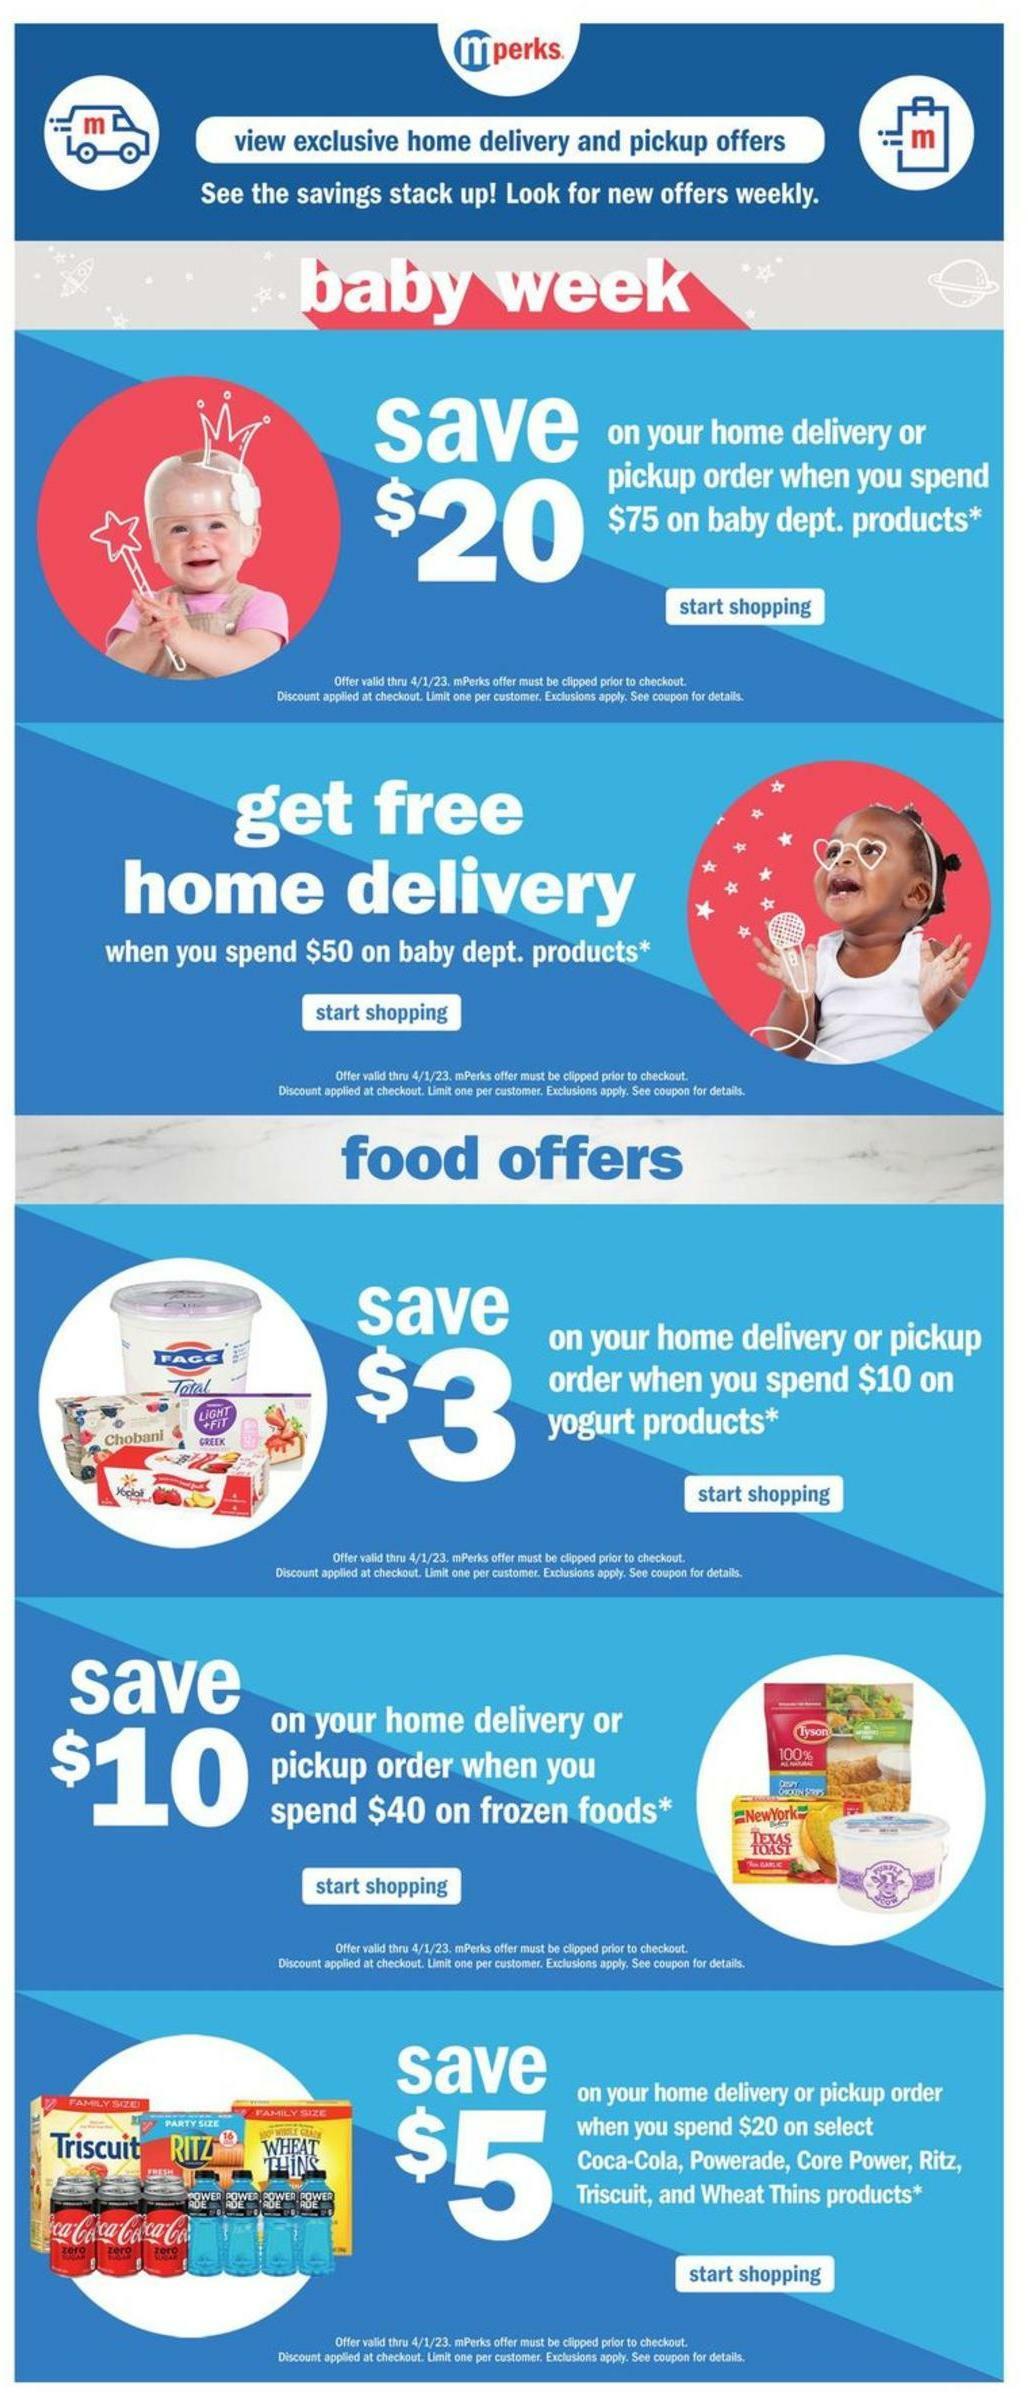 Meijer Weekly Ad from March 26